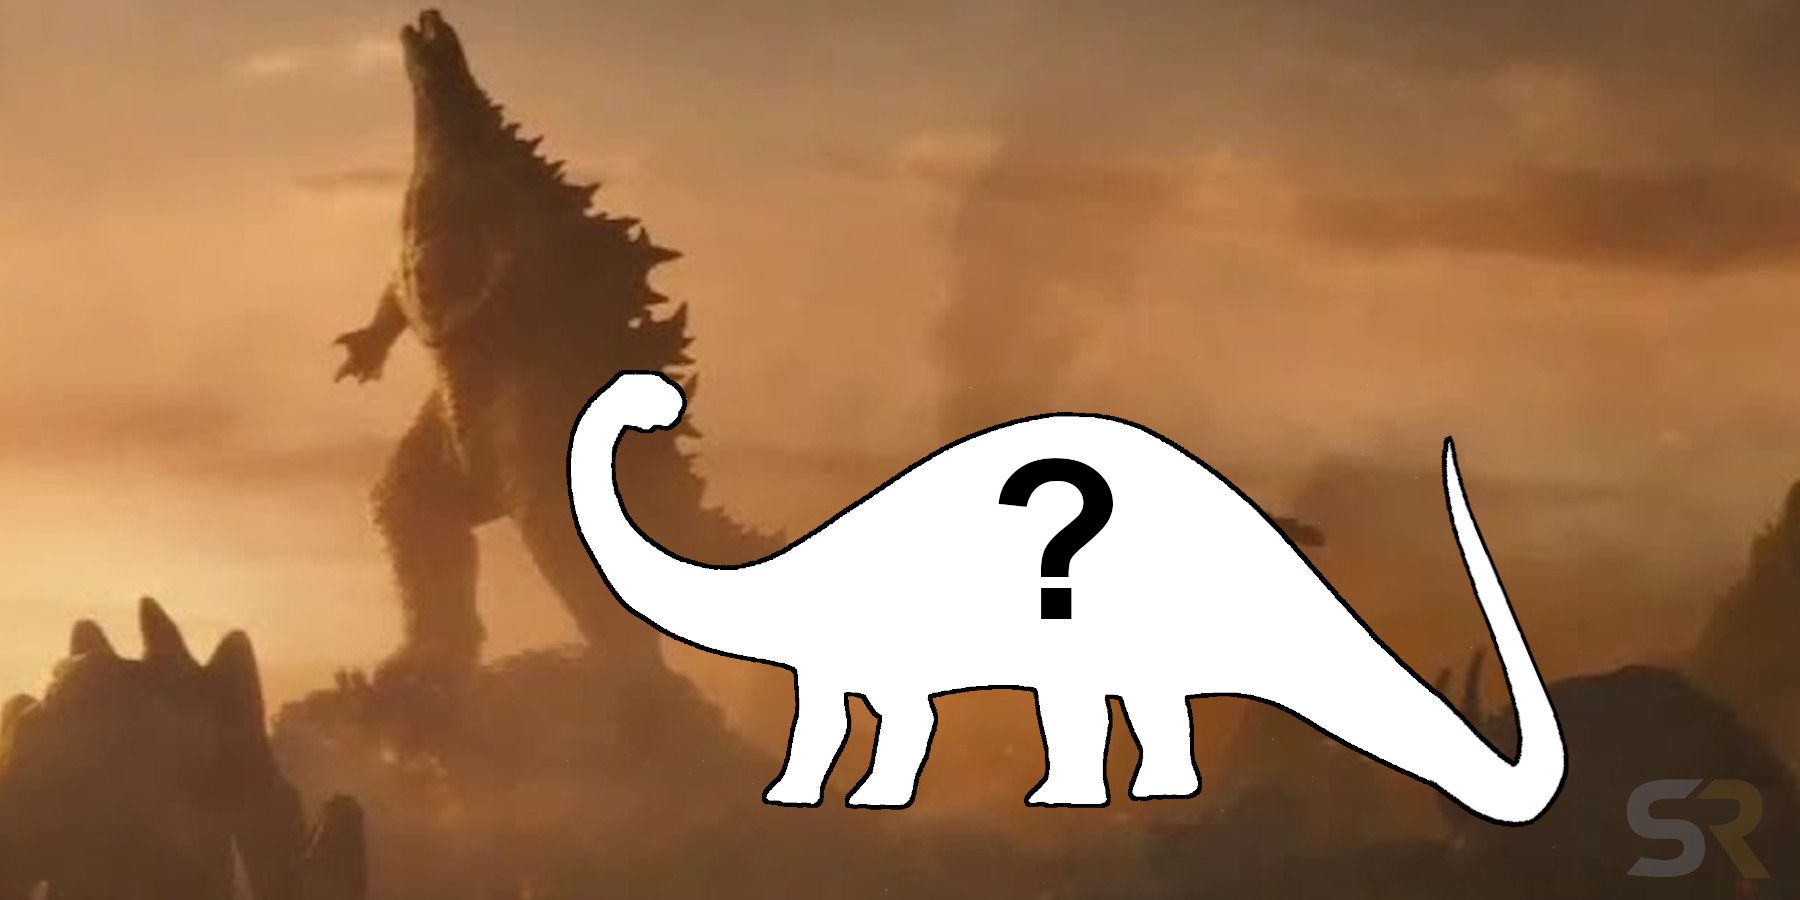 What is the Mokele-mbembe?